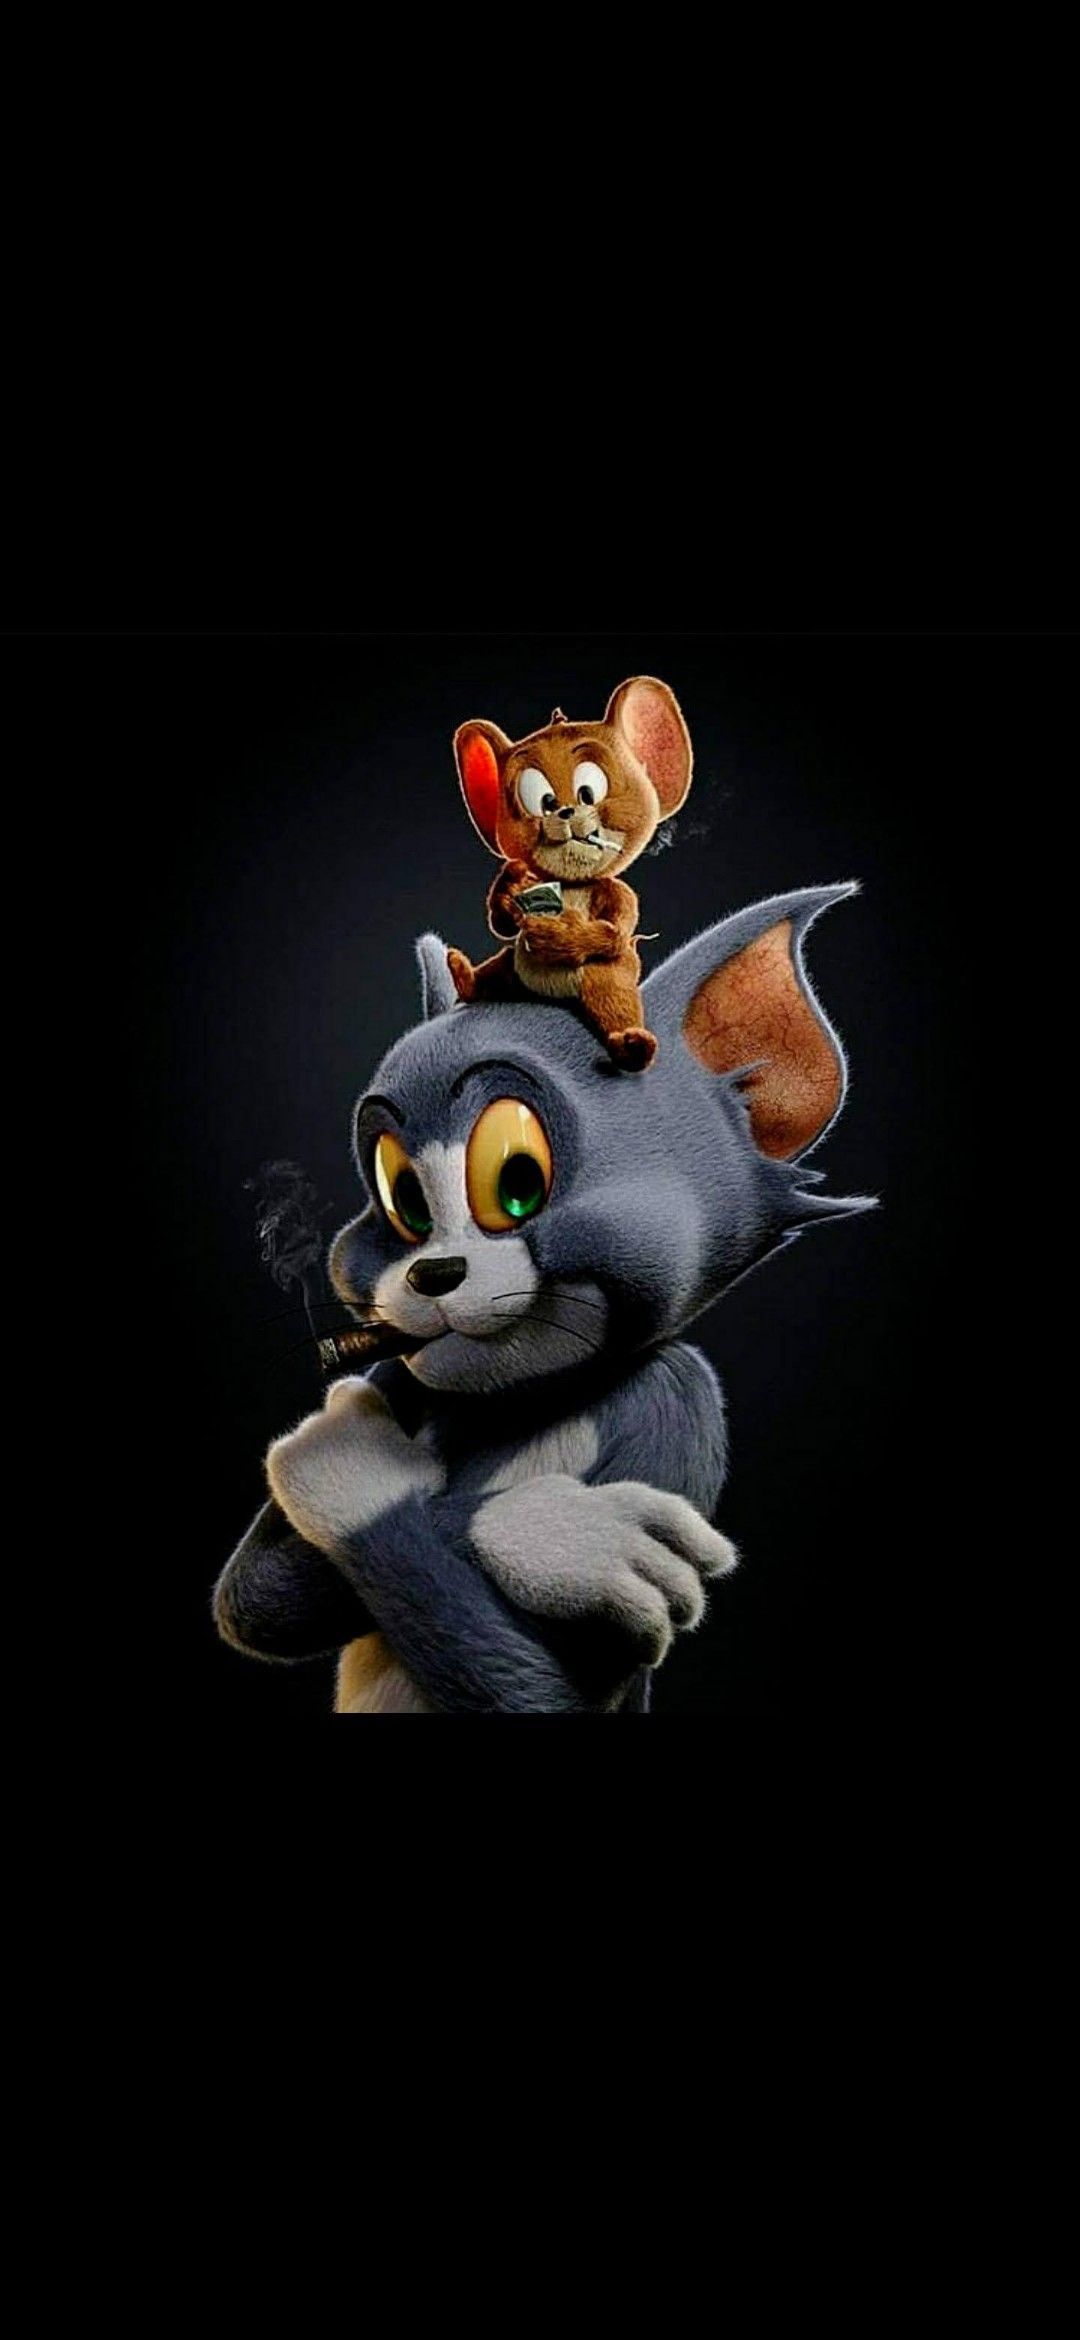 Amoled Archives ⋆ ⋆ Traxzee. Tom and jerry wallpaper, Cute cartoon wallpaper, Tom and jerry cartoon